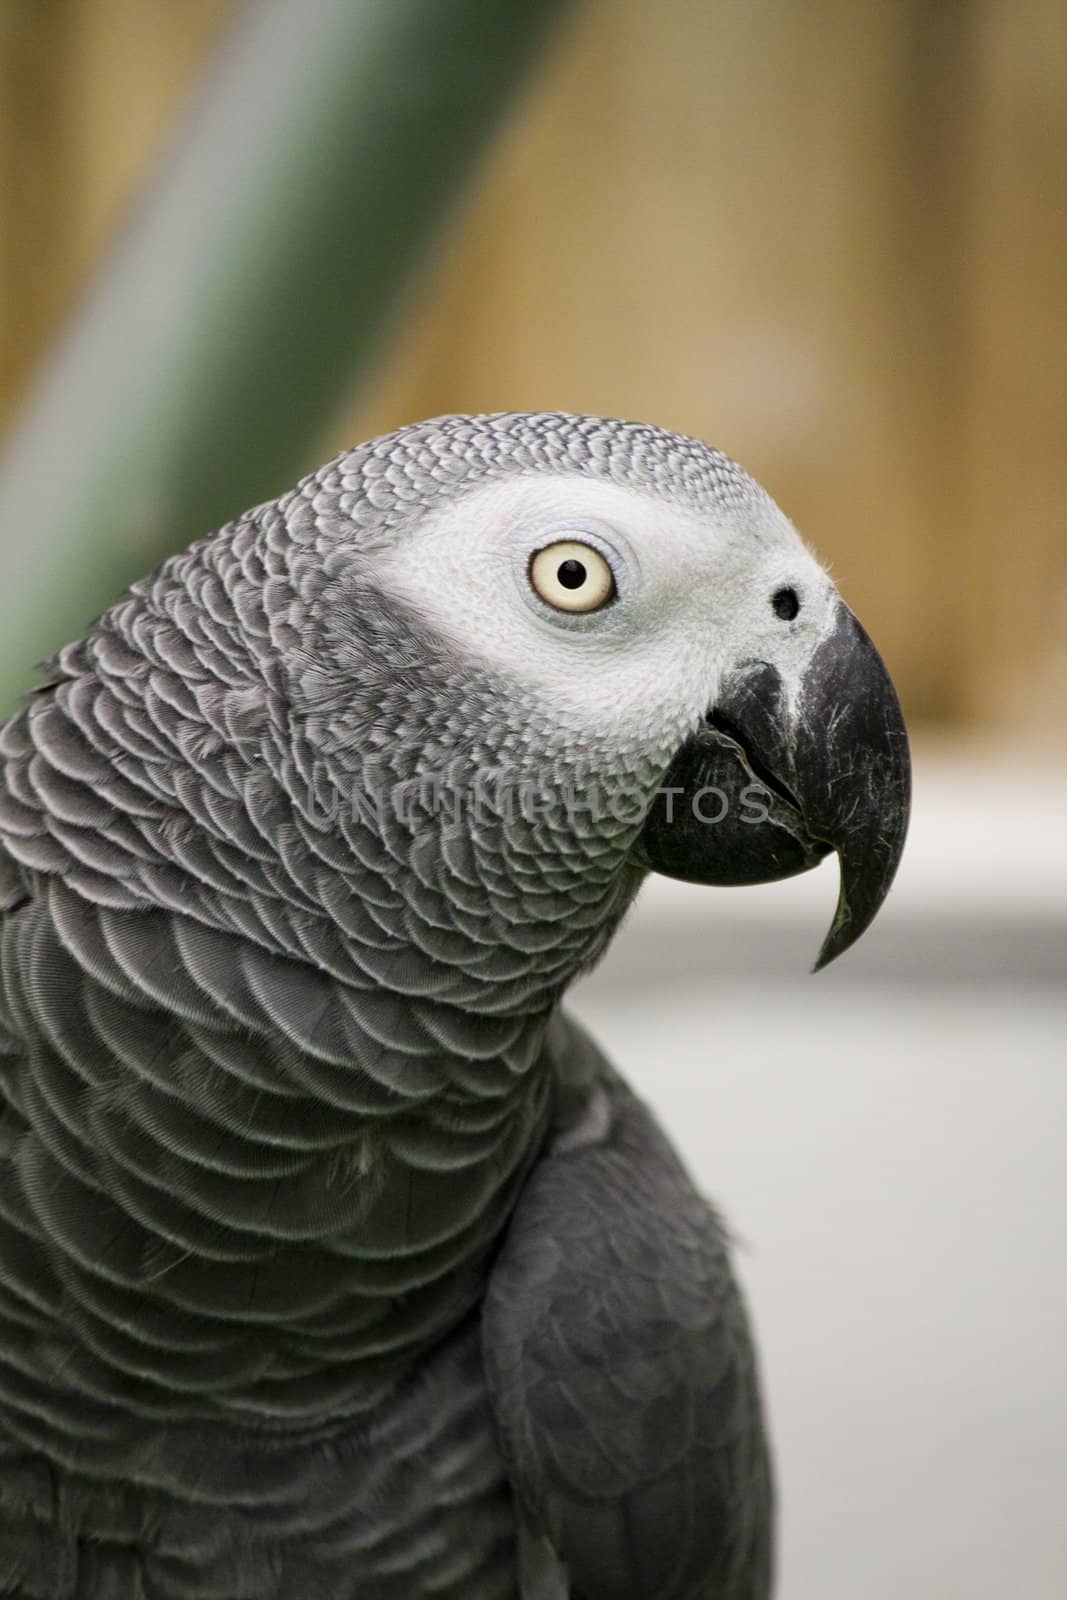 View of a african grey parrot on a performance show.